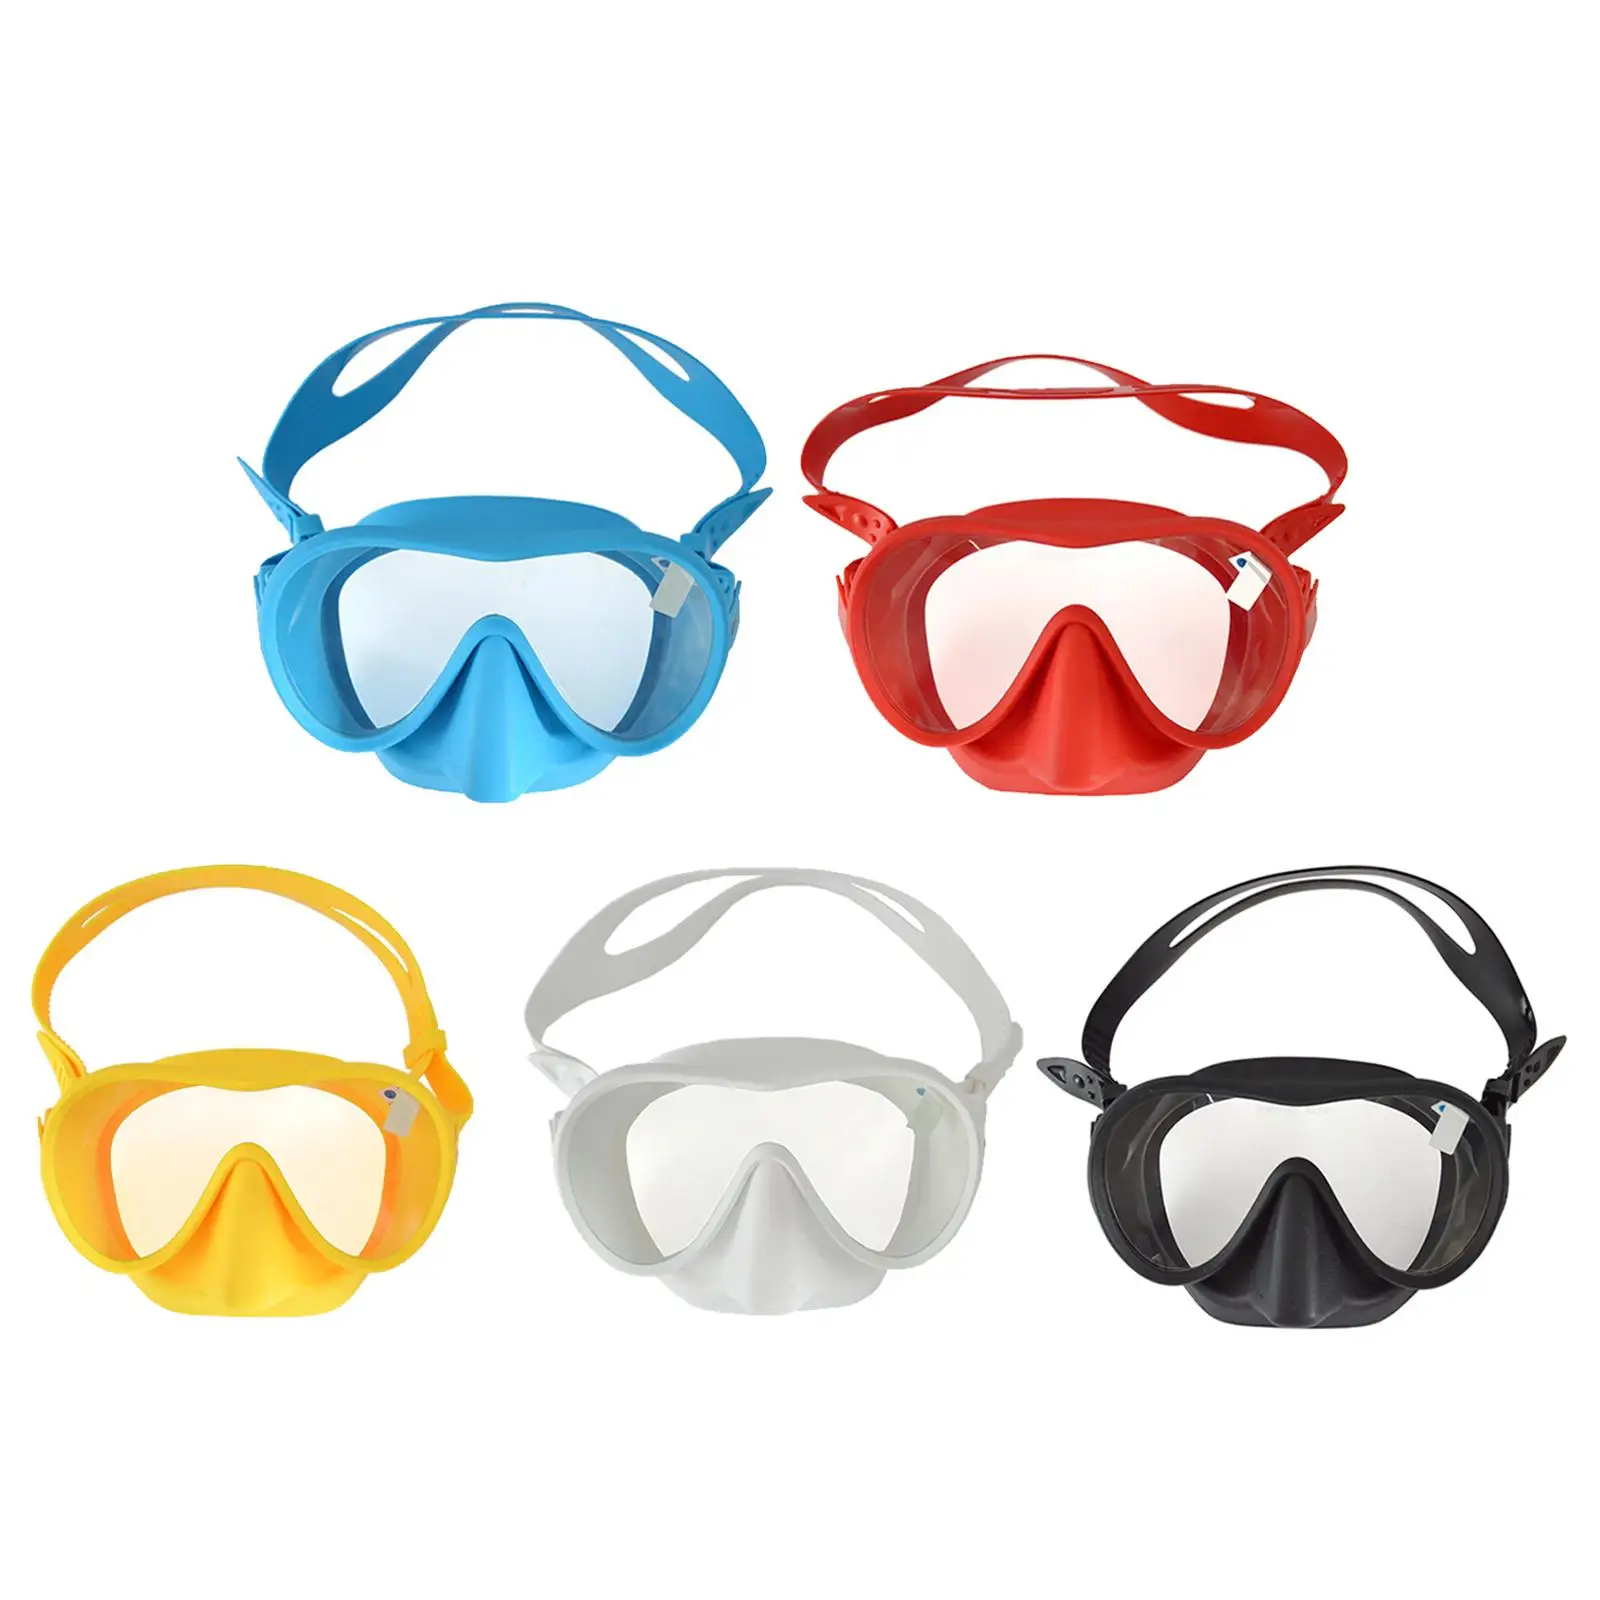 

Snorkel Goggles Anti Fog with Nose Cover Scuba Dive Accesscories Snorkeling Waterproof Panoramic View Diving Mask for Women Pool